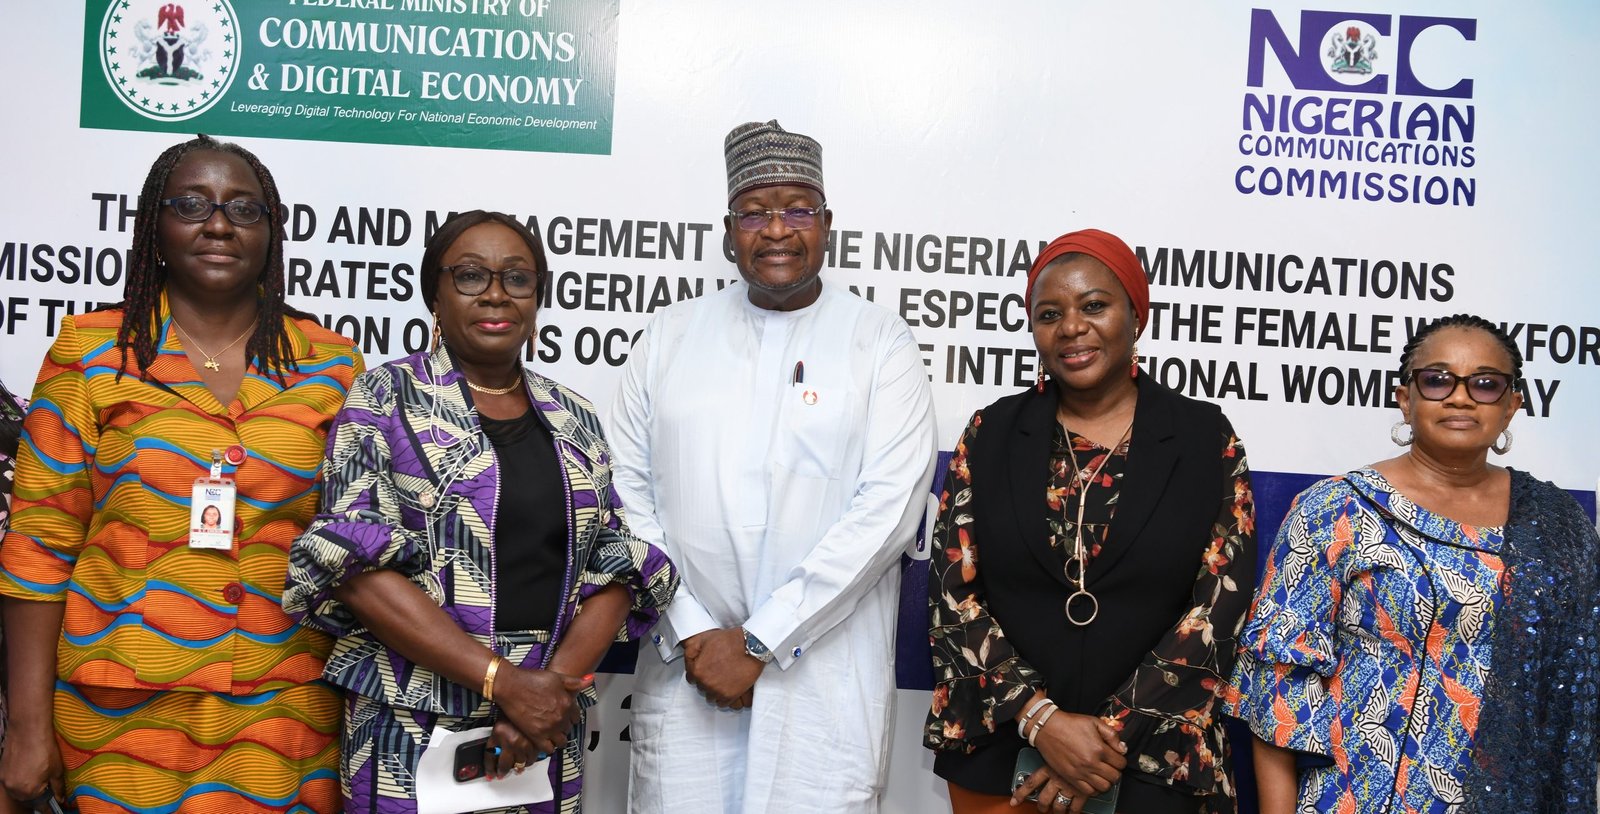 L-R: Stella Erebor, Deputy Director, Financial Services; Nnena Ukoha, Head, Corporate Communications; Prof. Umar Garba Danbatta, Executive Vice Chairman/Chief Executive Officer; Hafsat Lawal, Head, Human Capital and Helen Obi, Head, Telecom Laws & Regulation, all of the Nigerian Communications Commission, during the 2023 International Women's Day Celebration at the NCC Head Office in Abuja on Wednesday (March 8, 2023).